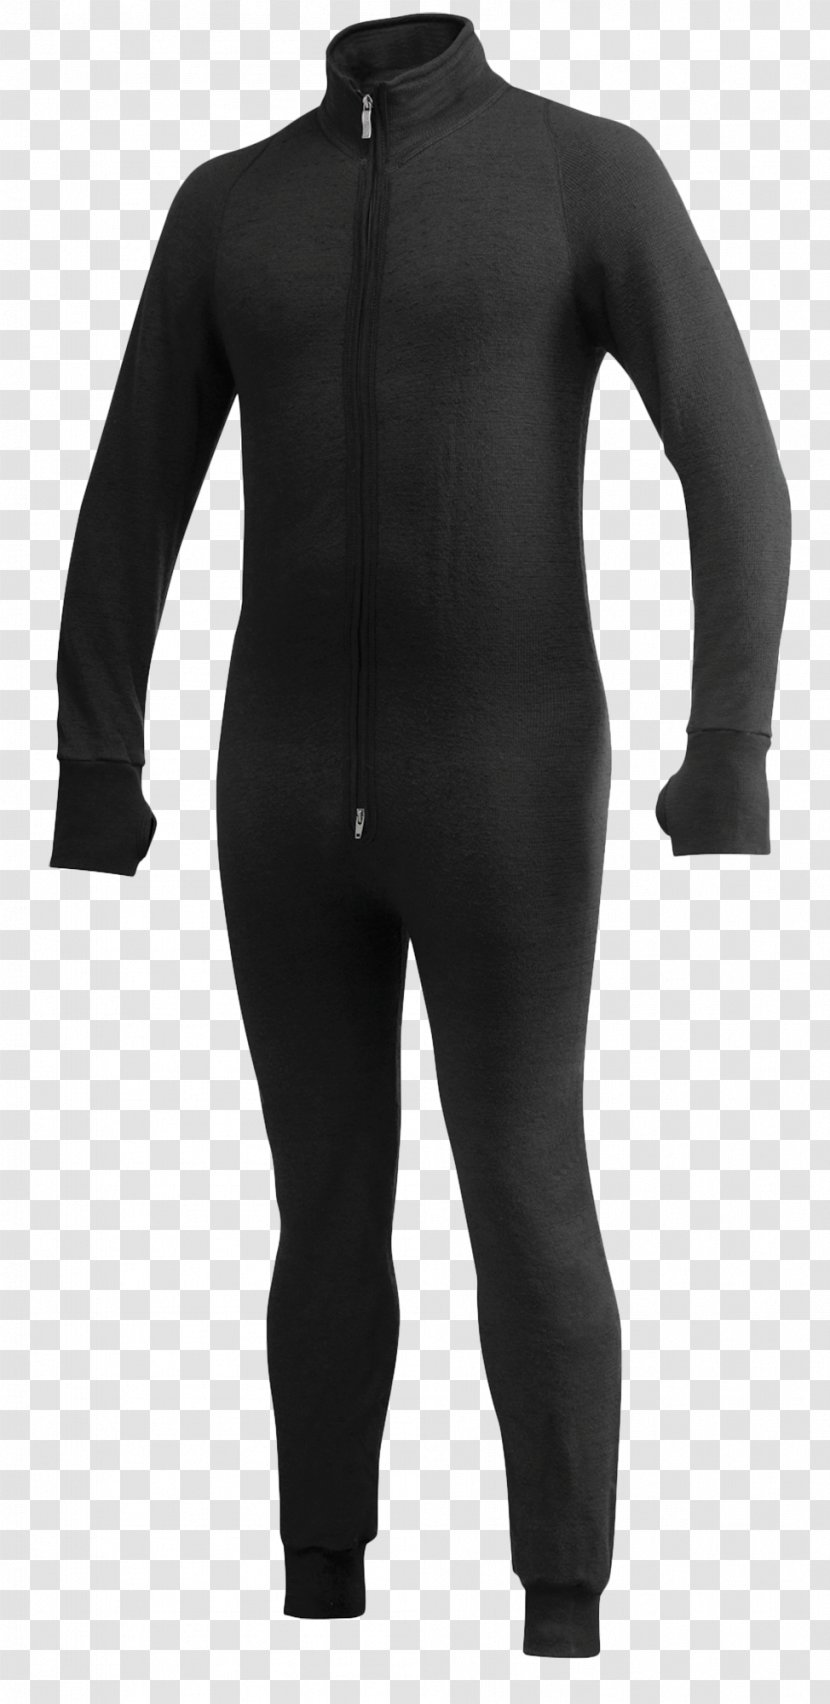 Wetsuit Surfing Clothing Free-diving Standup Paddleboarding - Neck - Suit Transparent PNG